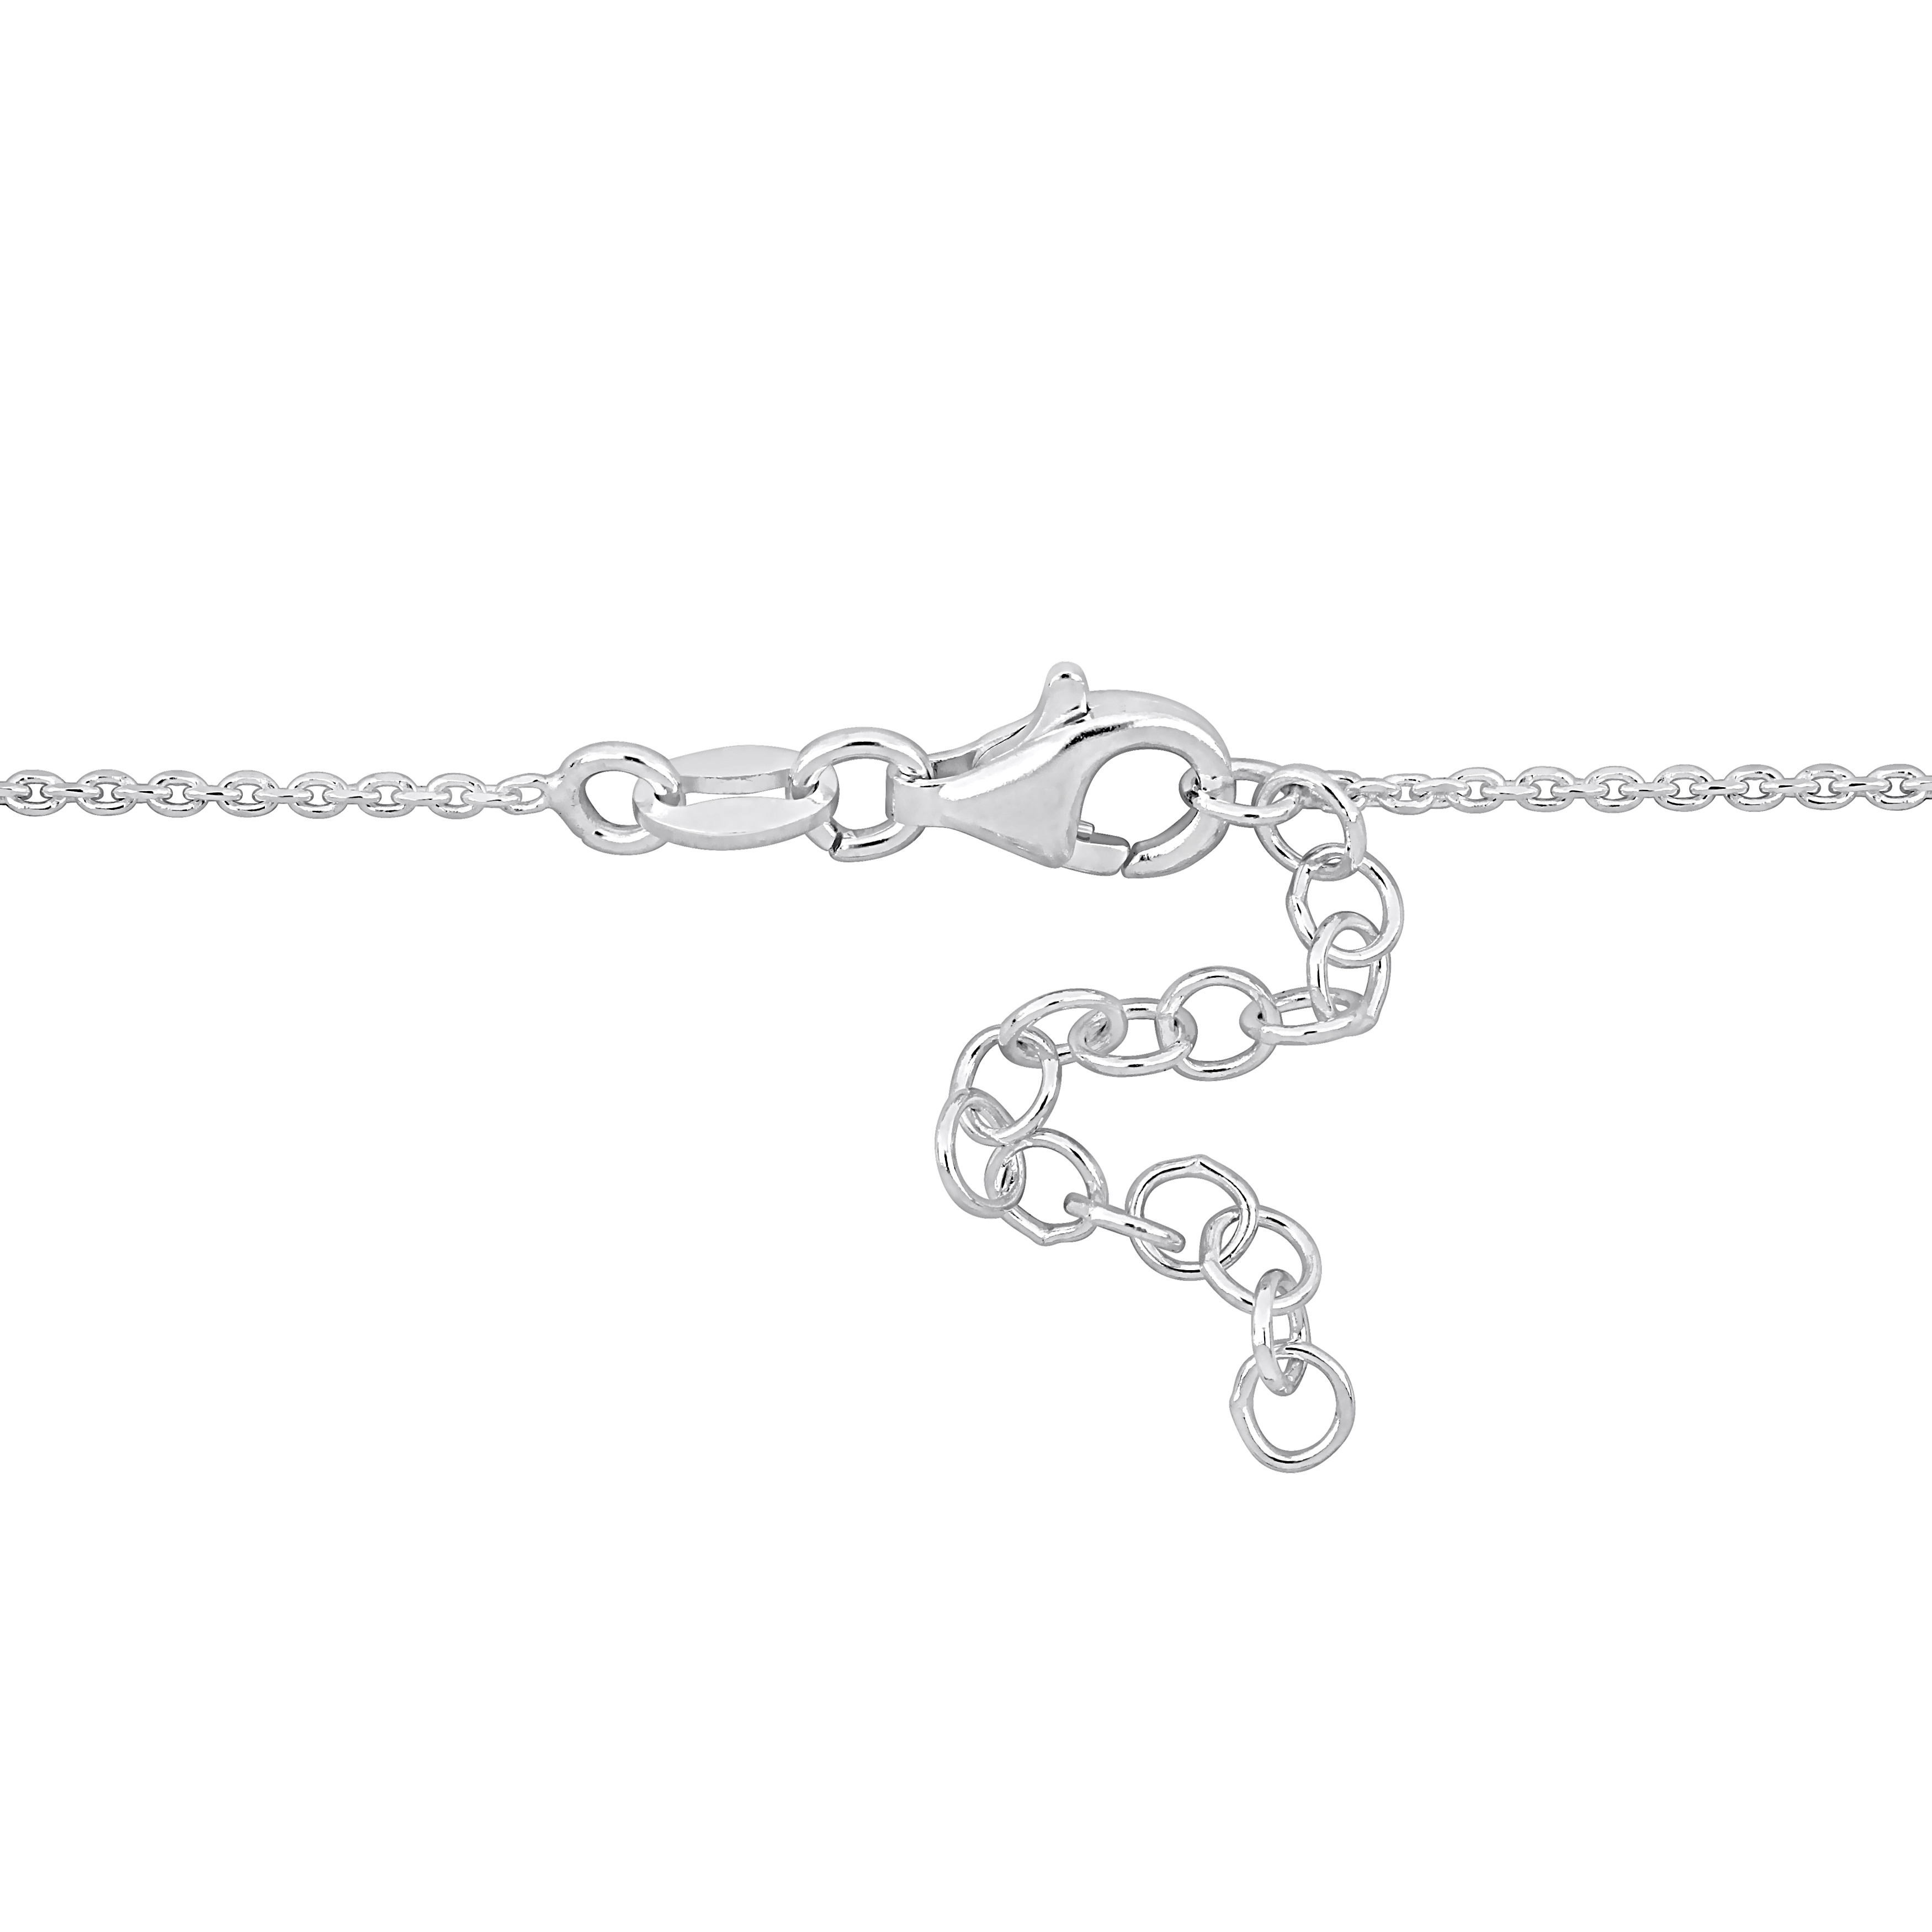 Yellow Double Heart Charm Necklace in Sterling Silver - 16.5 +1 in.